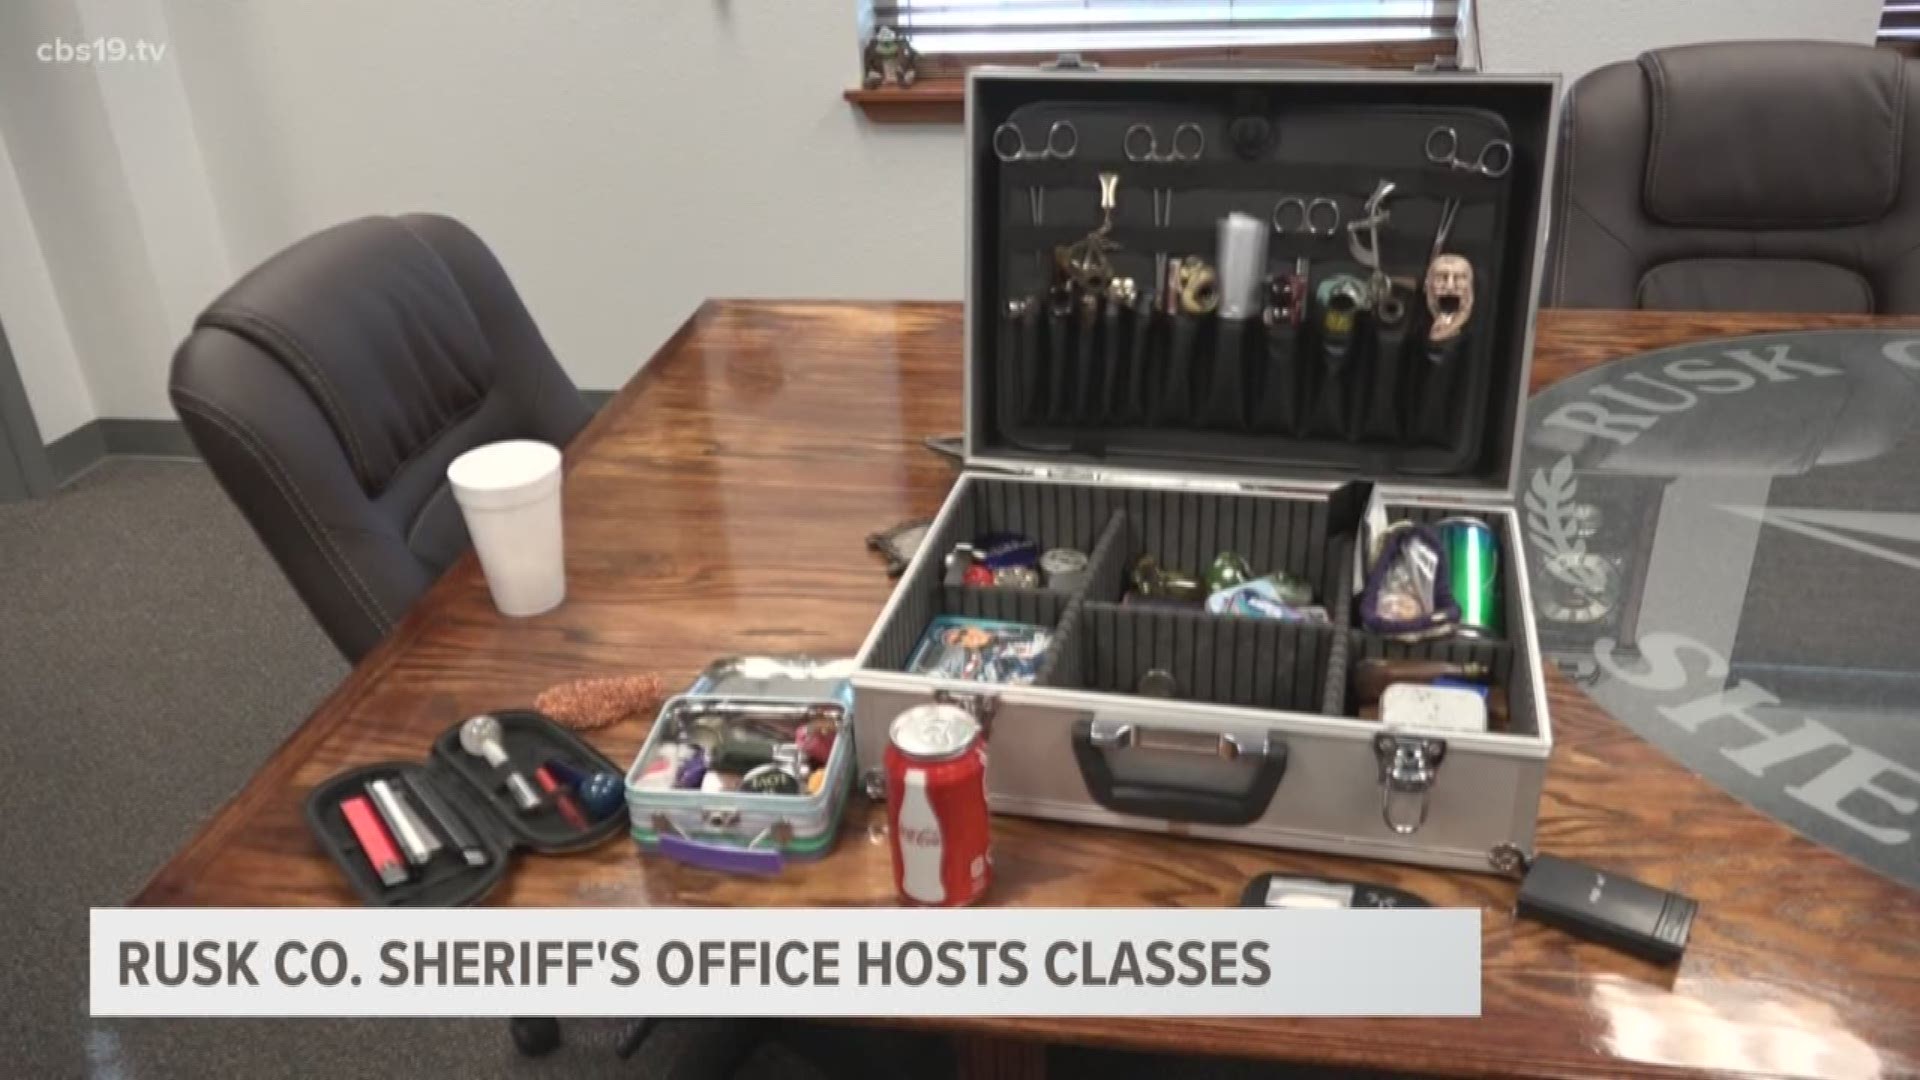 Even though the Rusk County Sheriff's Office has been working to educate the community on drugs, alcohol, and bullying, after a recent arrest parents have been request classes specifically for their children.